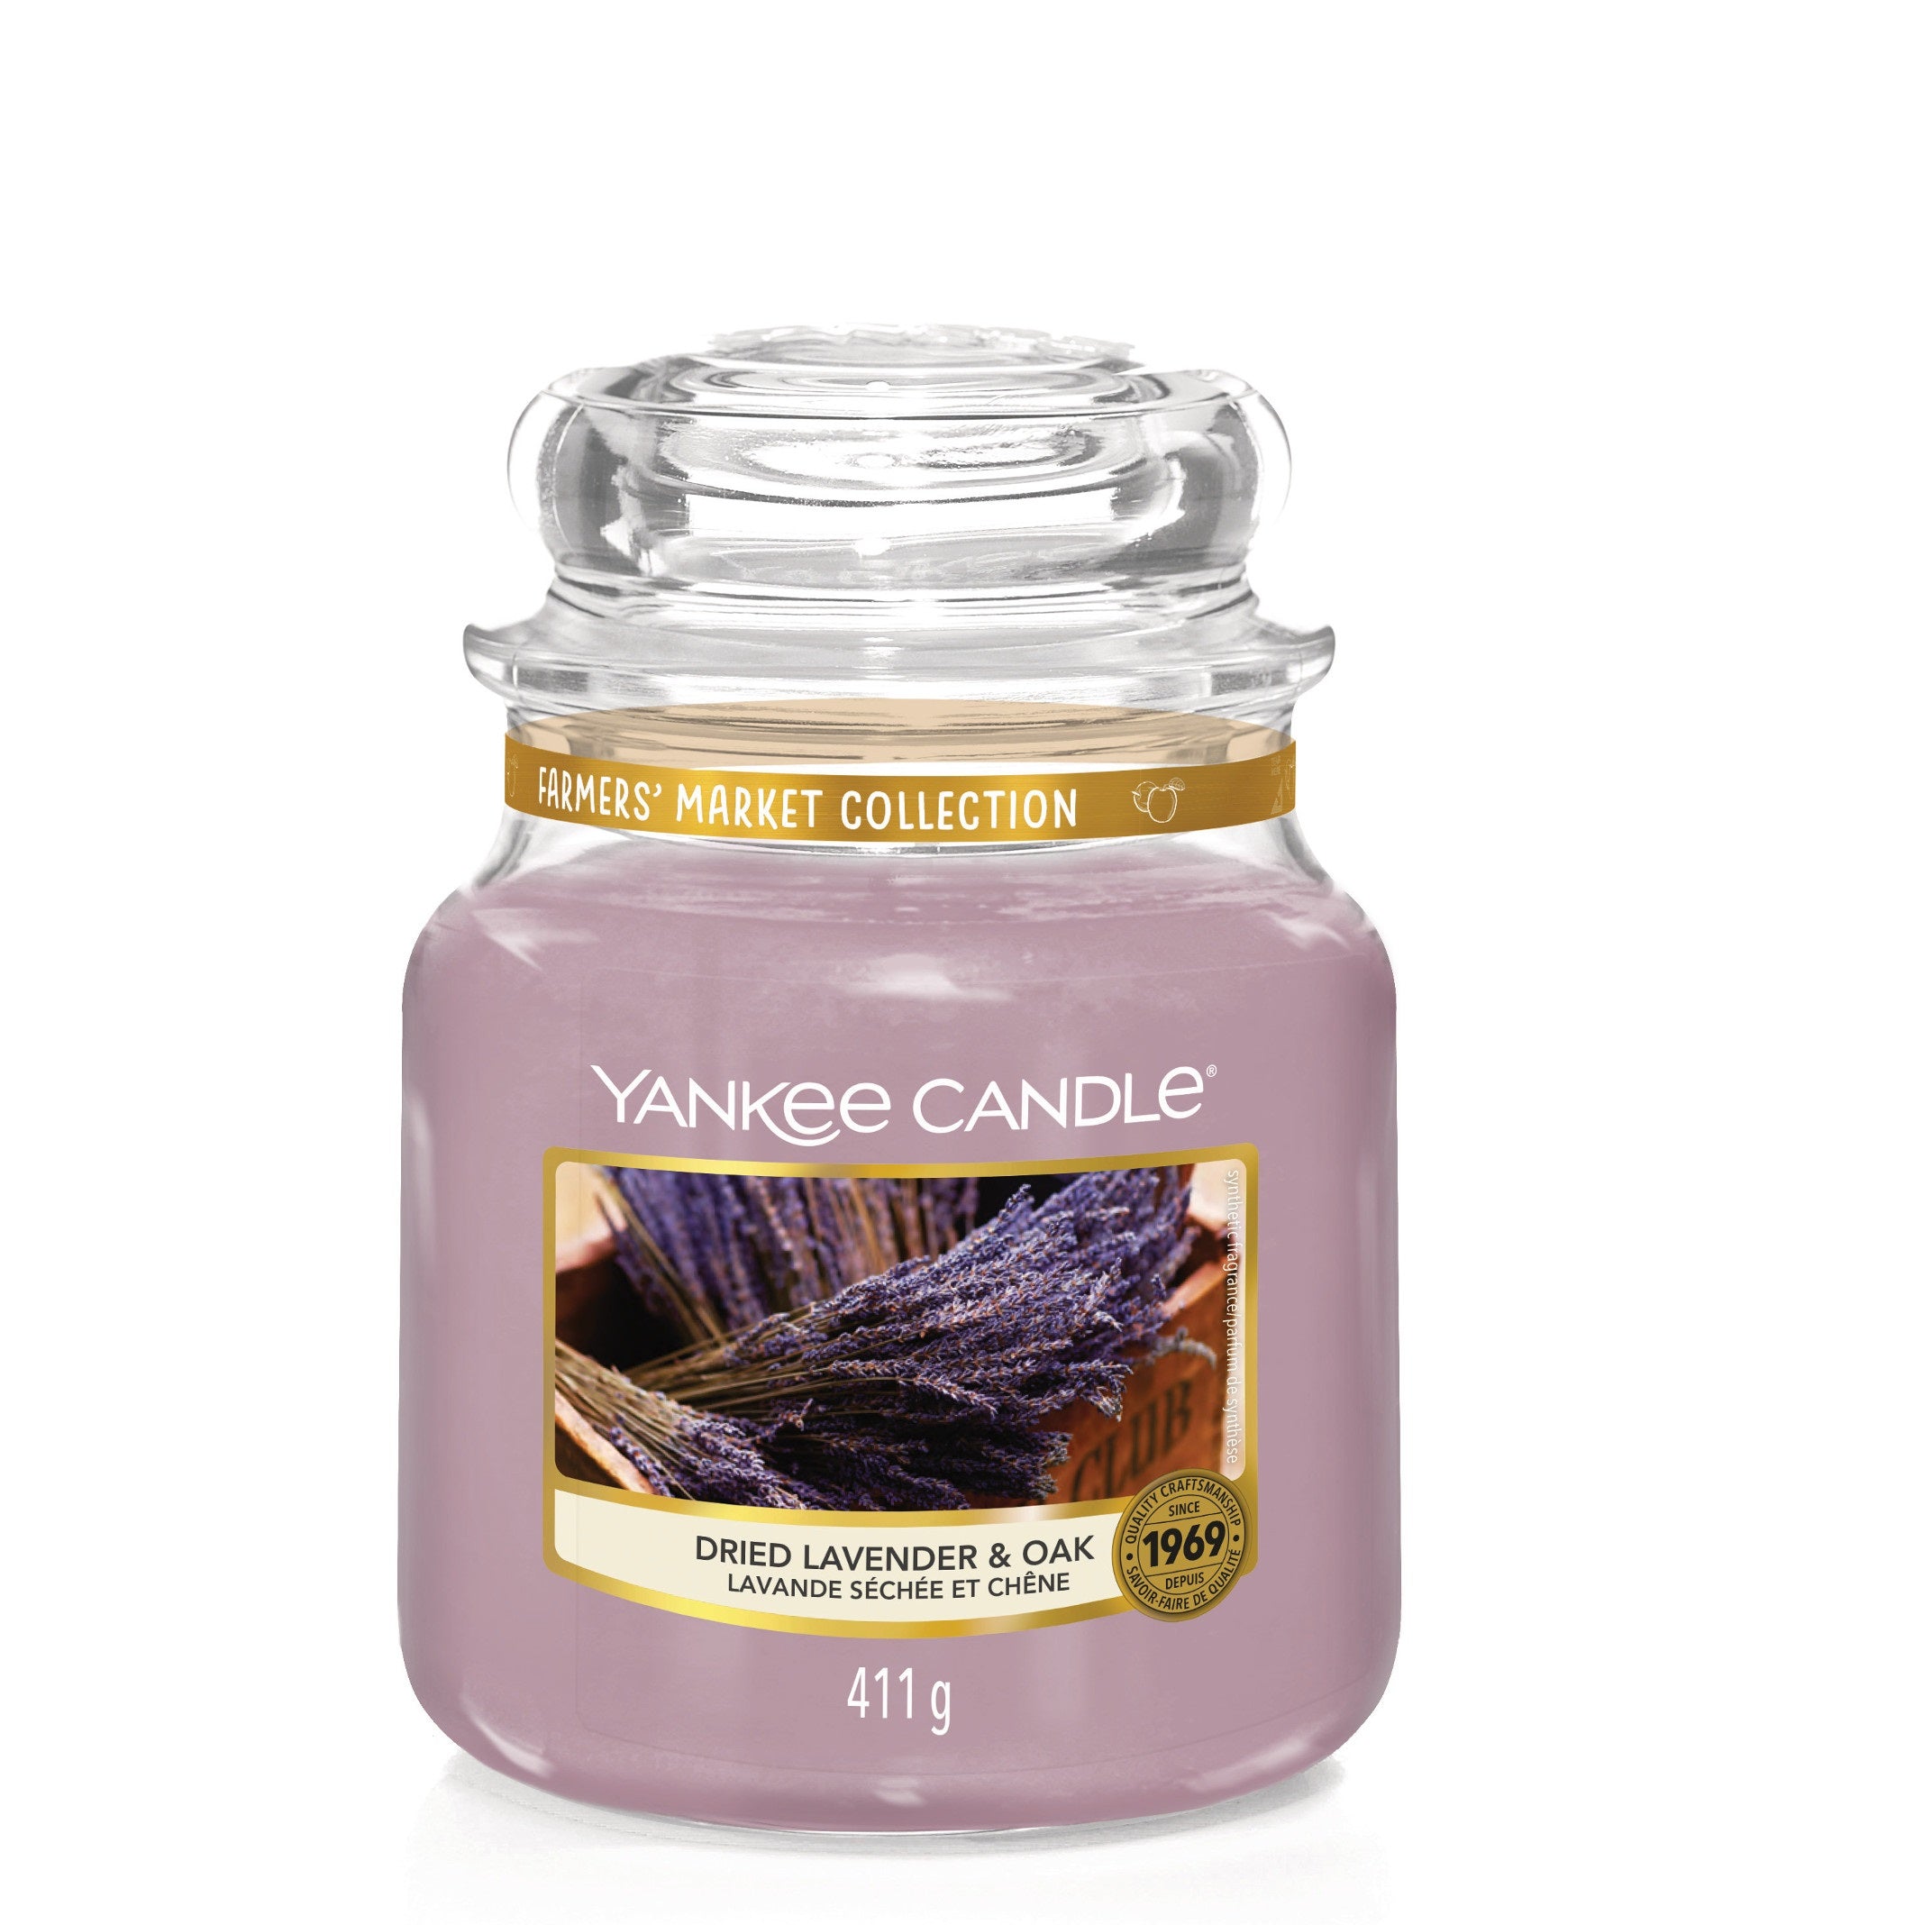 DRIED LAVENDER & OAK -Yankee Candle- Giara Media – Candle With Care